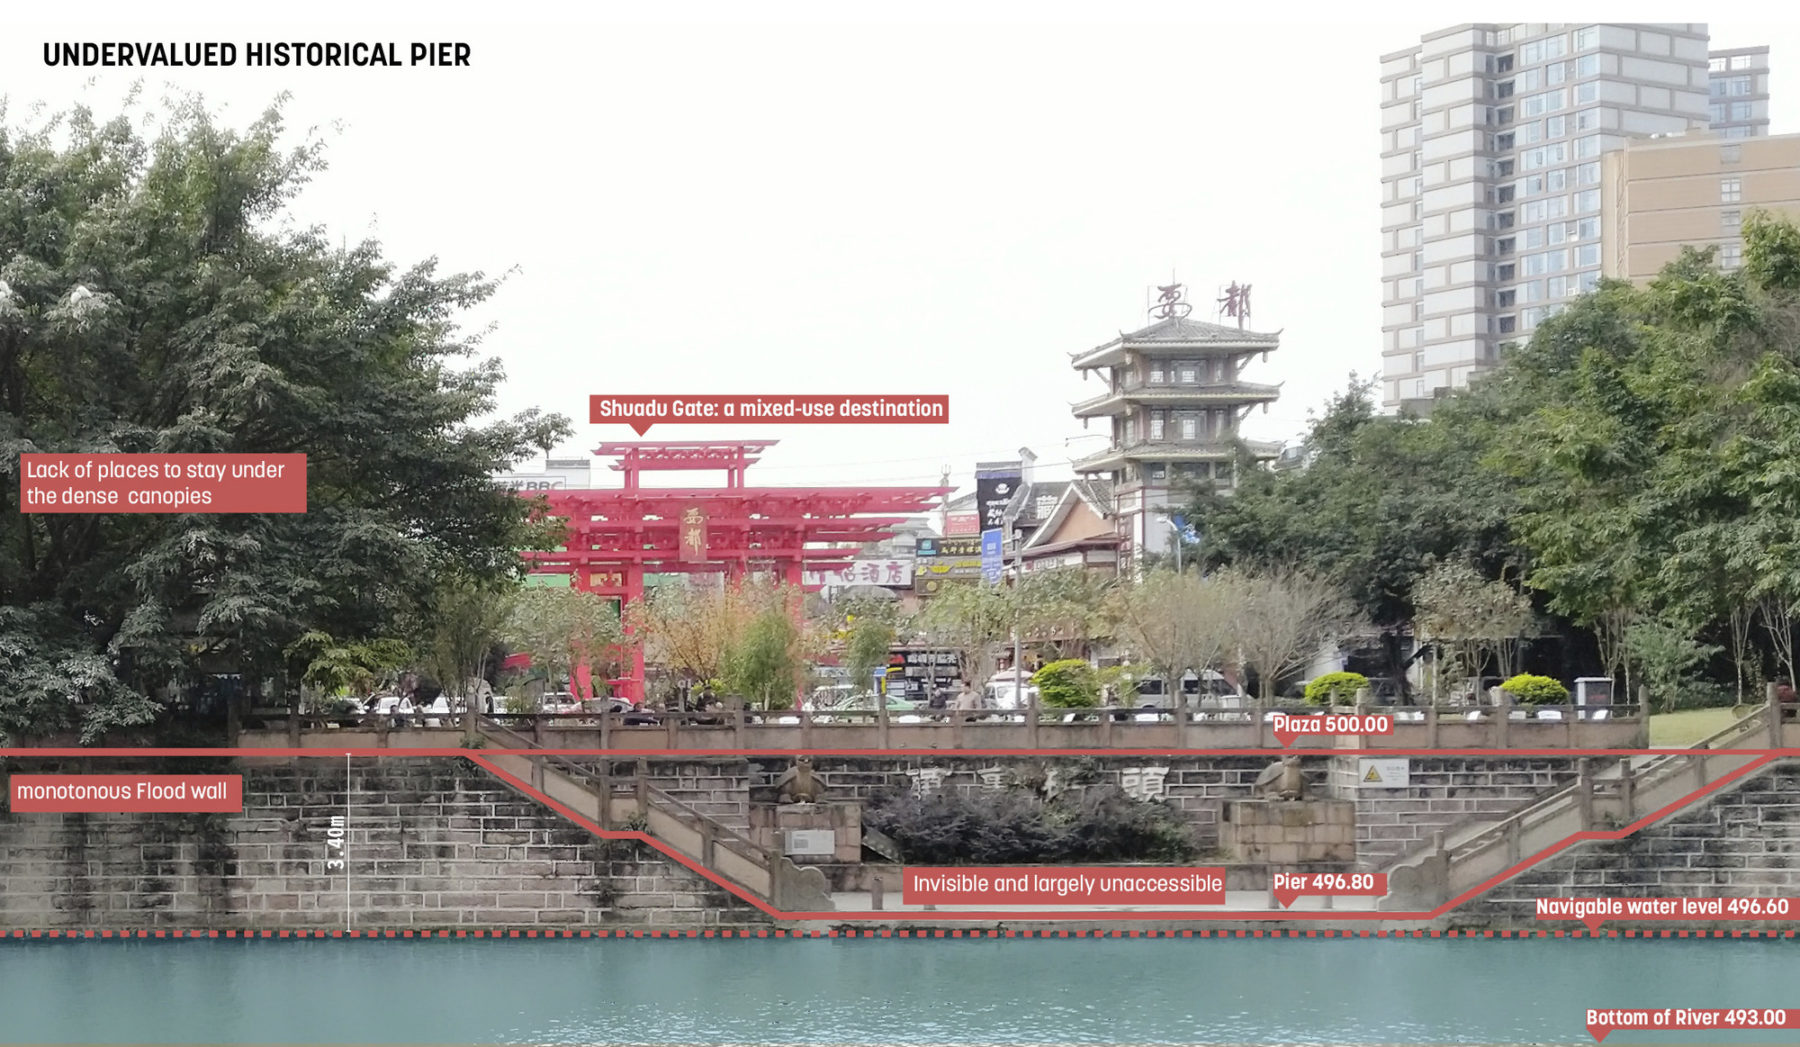 Annotated photo of existing pier which notes the current shortcomings. Image title reads 